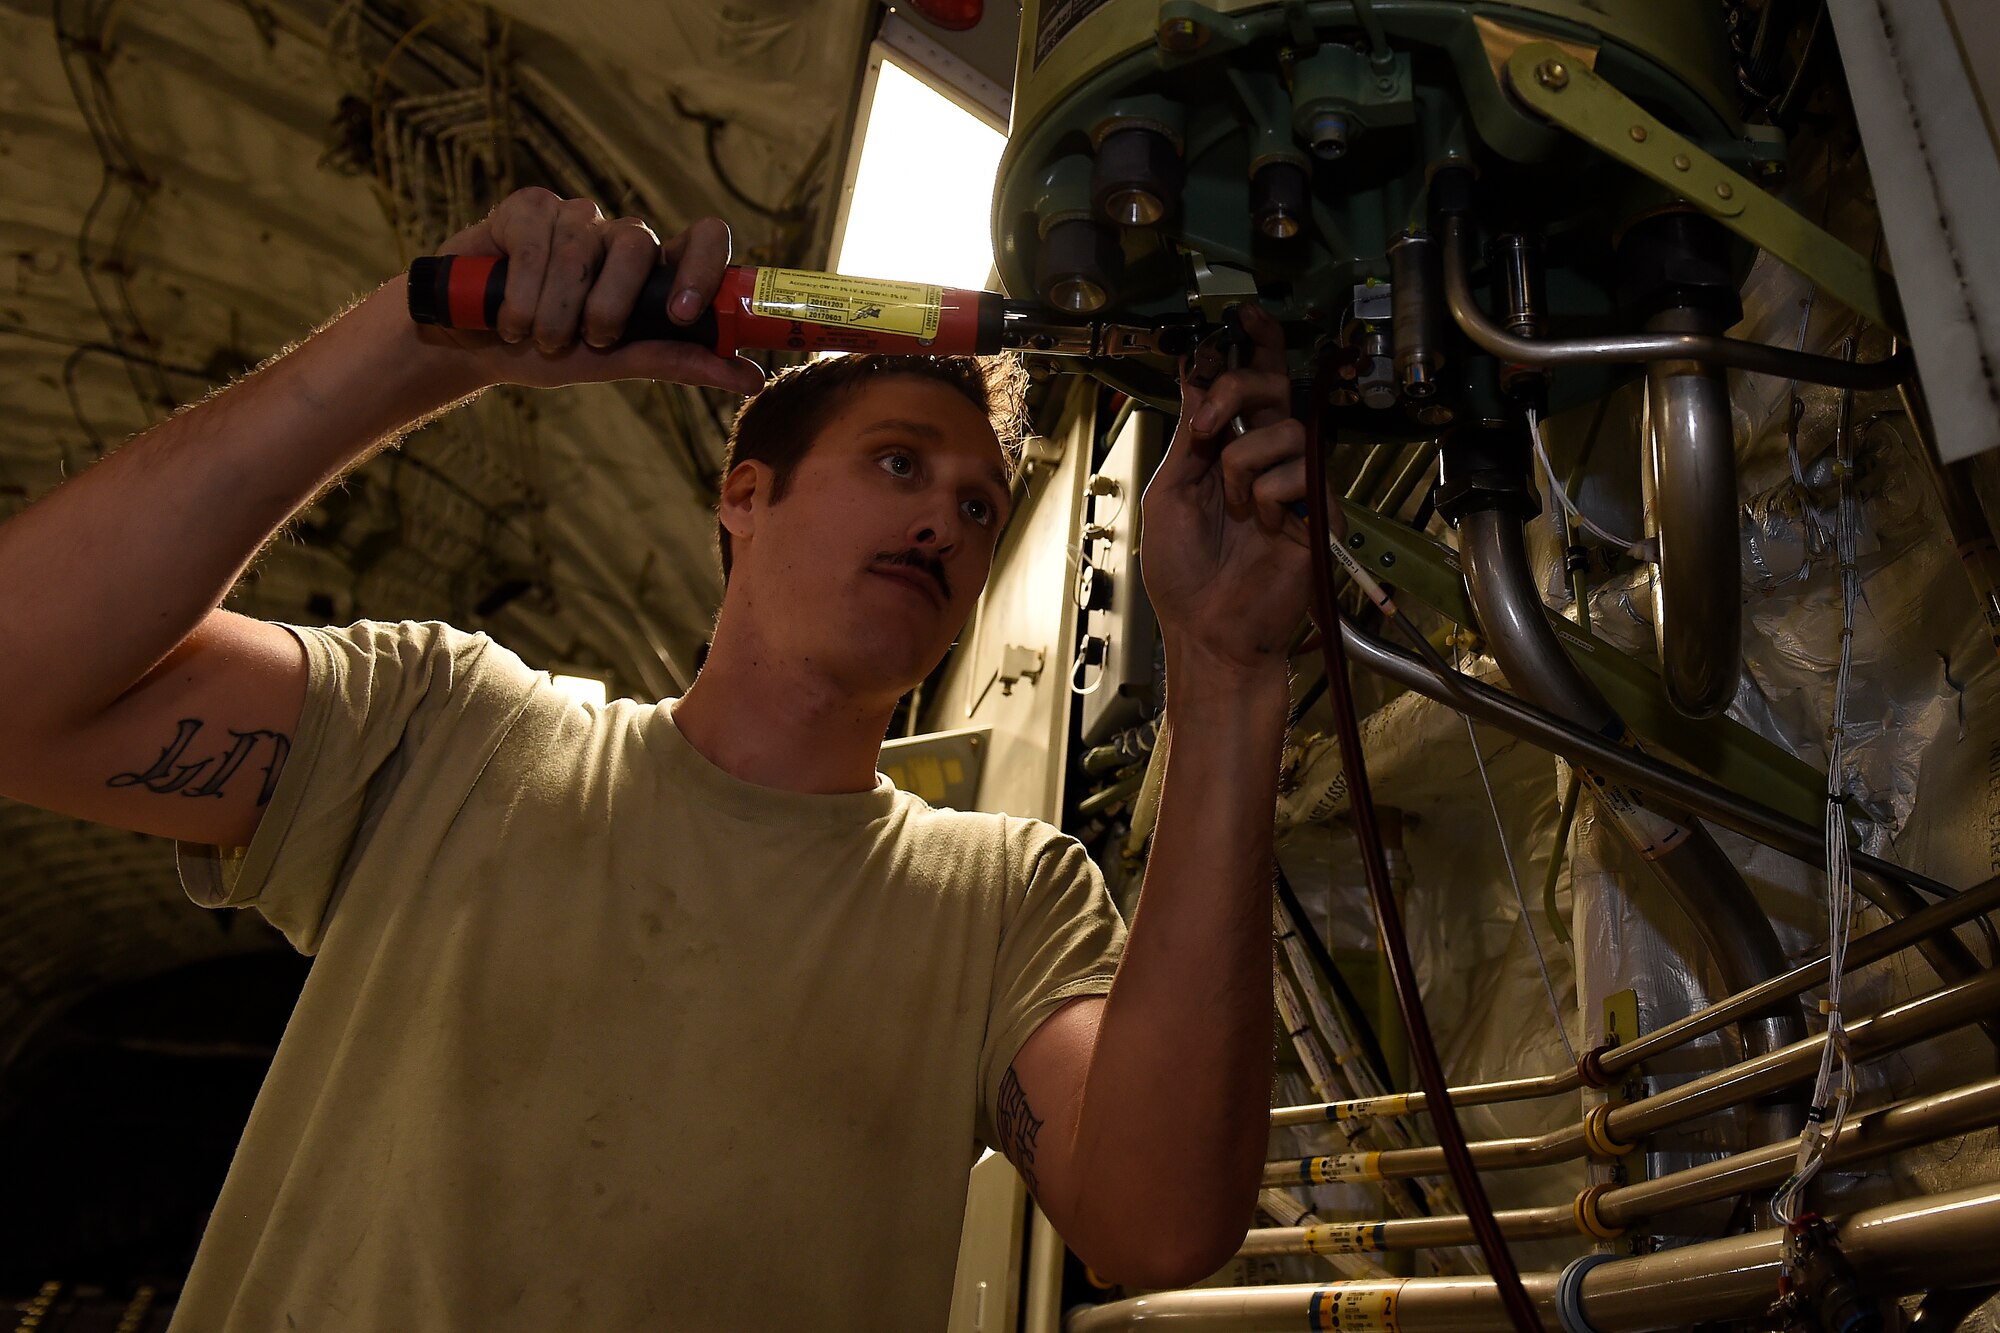 Staff Sgt. Nathan Kuhn, 62nd Maintenance Squadron hydraulics systems craftsman, installs a hydraulic reservoir on a C-17 Globemaster III, Feb. 18, 2016 at North Island Naval Station, Calif. Kuhn was the team lead for a four person McChord Maintenance Recovery Team sent from Joint Base Lewis McChord, Wash., to fix the broken reservoir. (U.S. Air Force photo/Tech Sgt. Tim Chacon)